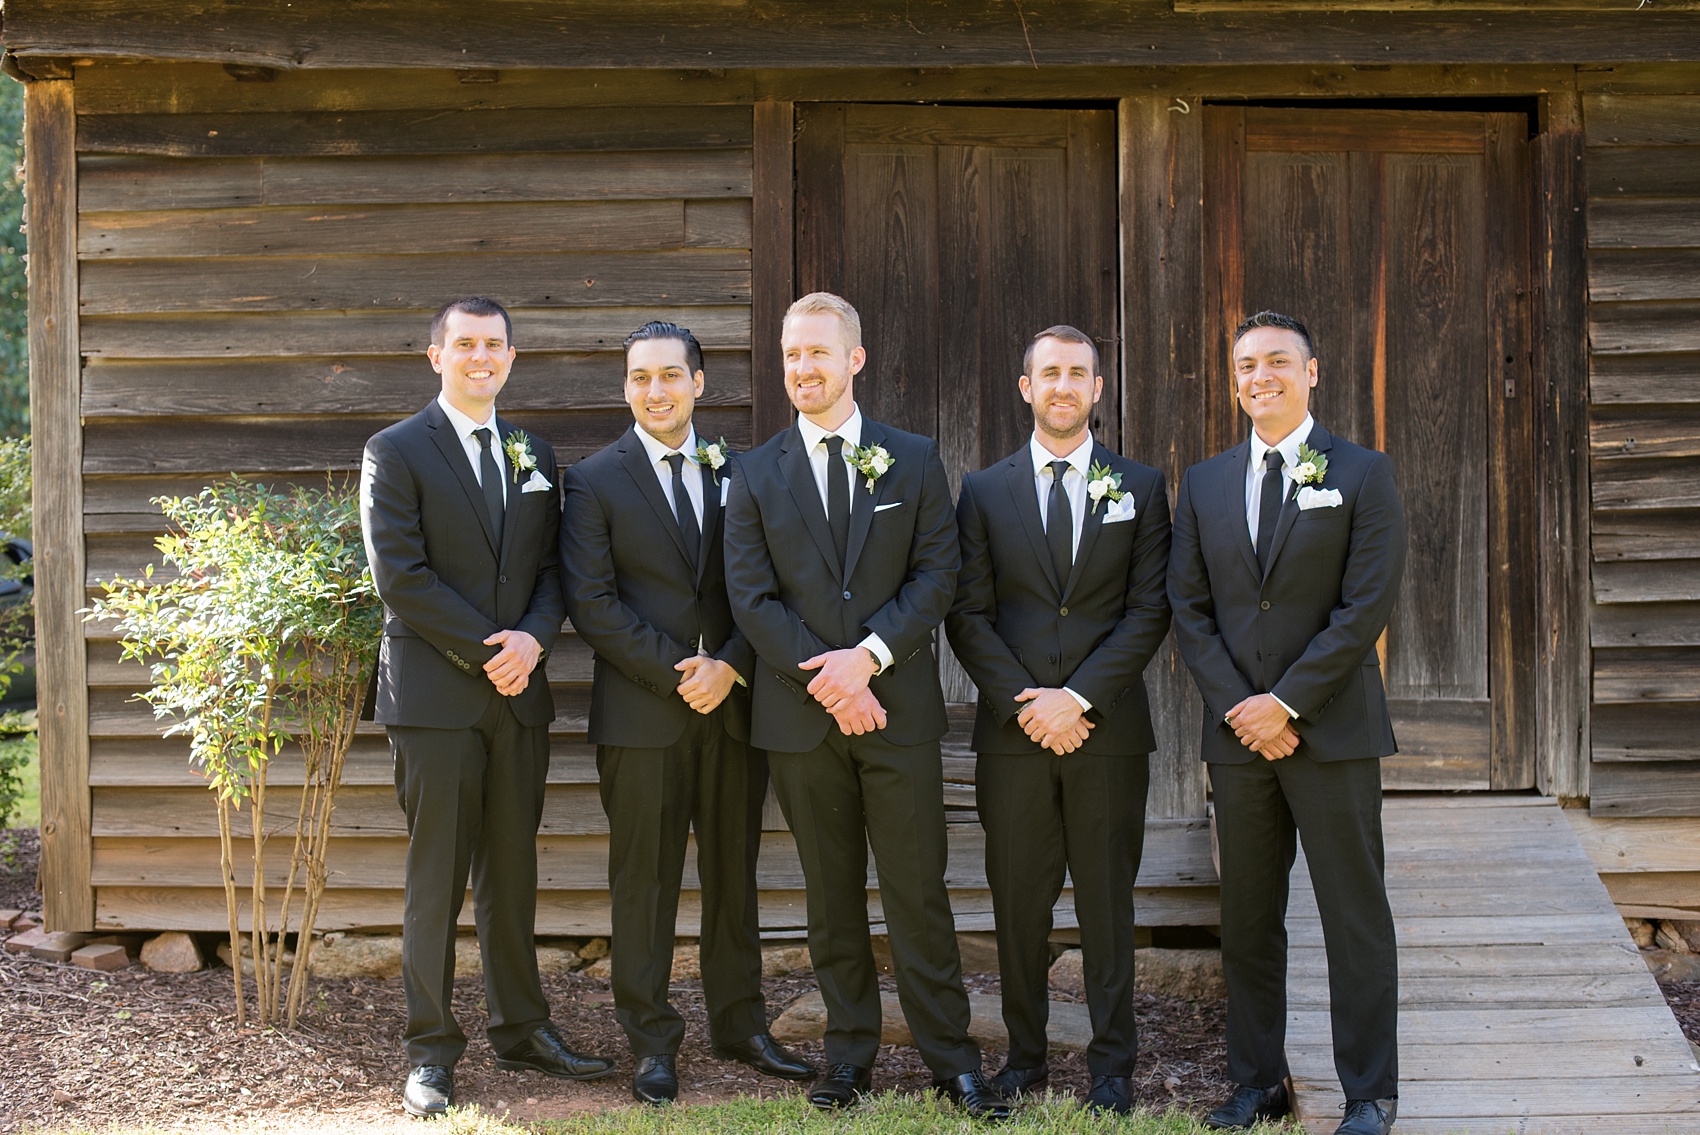 The Sutherland Wedding Photos by Mikkel Paige Photography. A fun groomsmen candid picture with the wedding party in classic black suits.